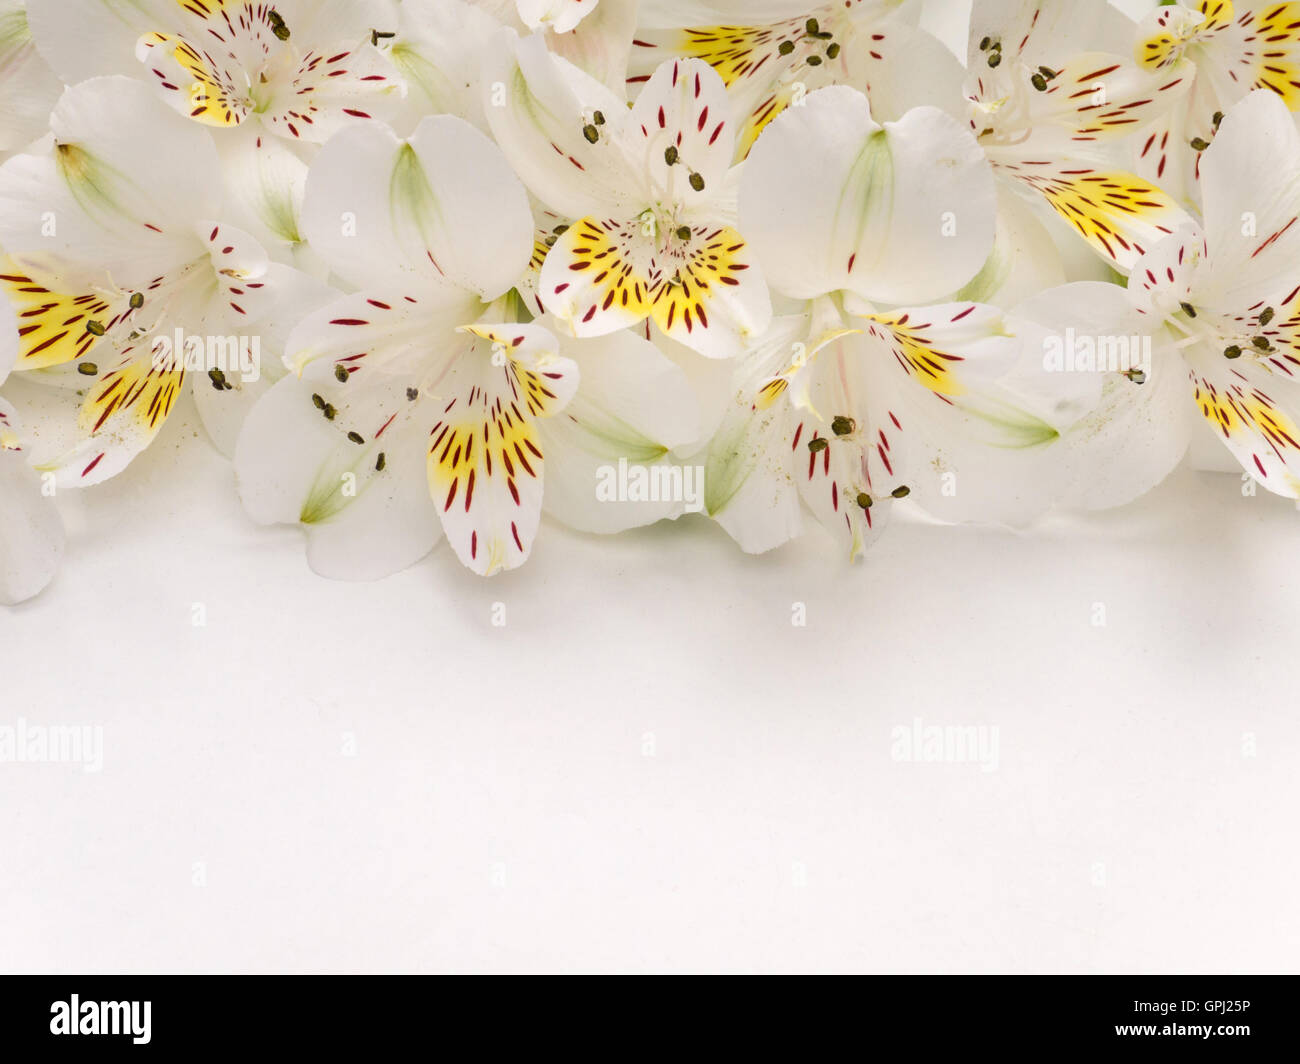 White and yellow alstroemeria flowers bouquet on the top of white background Stock Photo